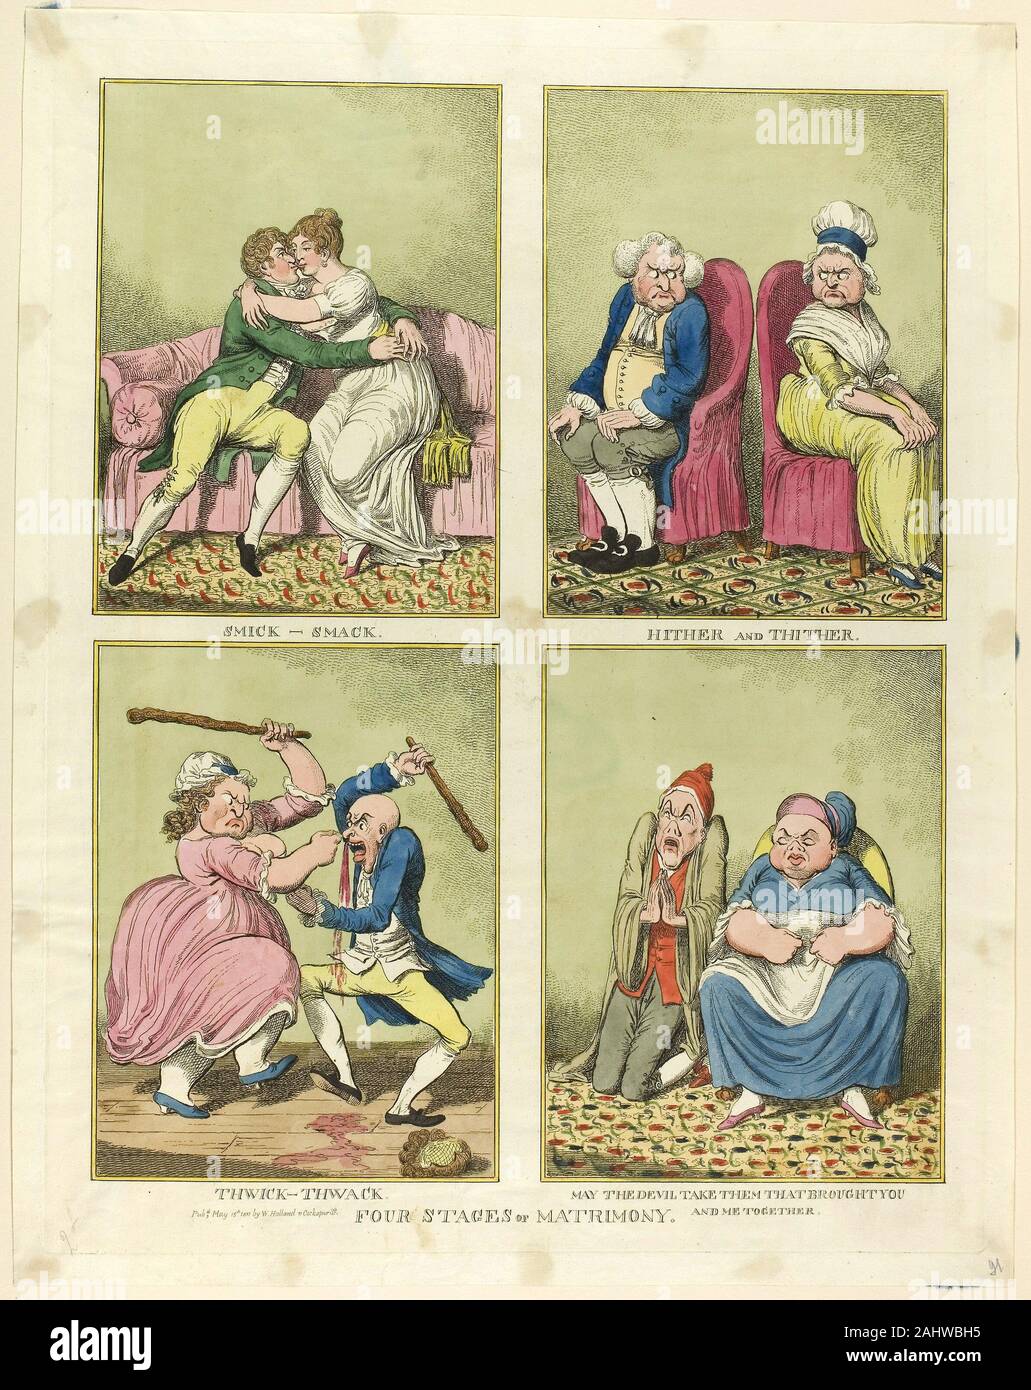 Richard Newton. Four Stages of Matrimony. 1811. England. Etching, with hand-coloring, on paper Stock Photo